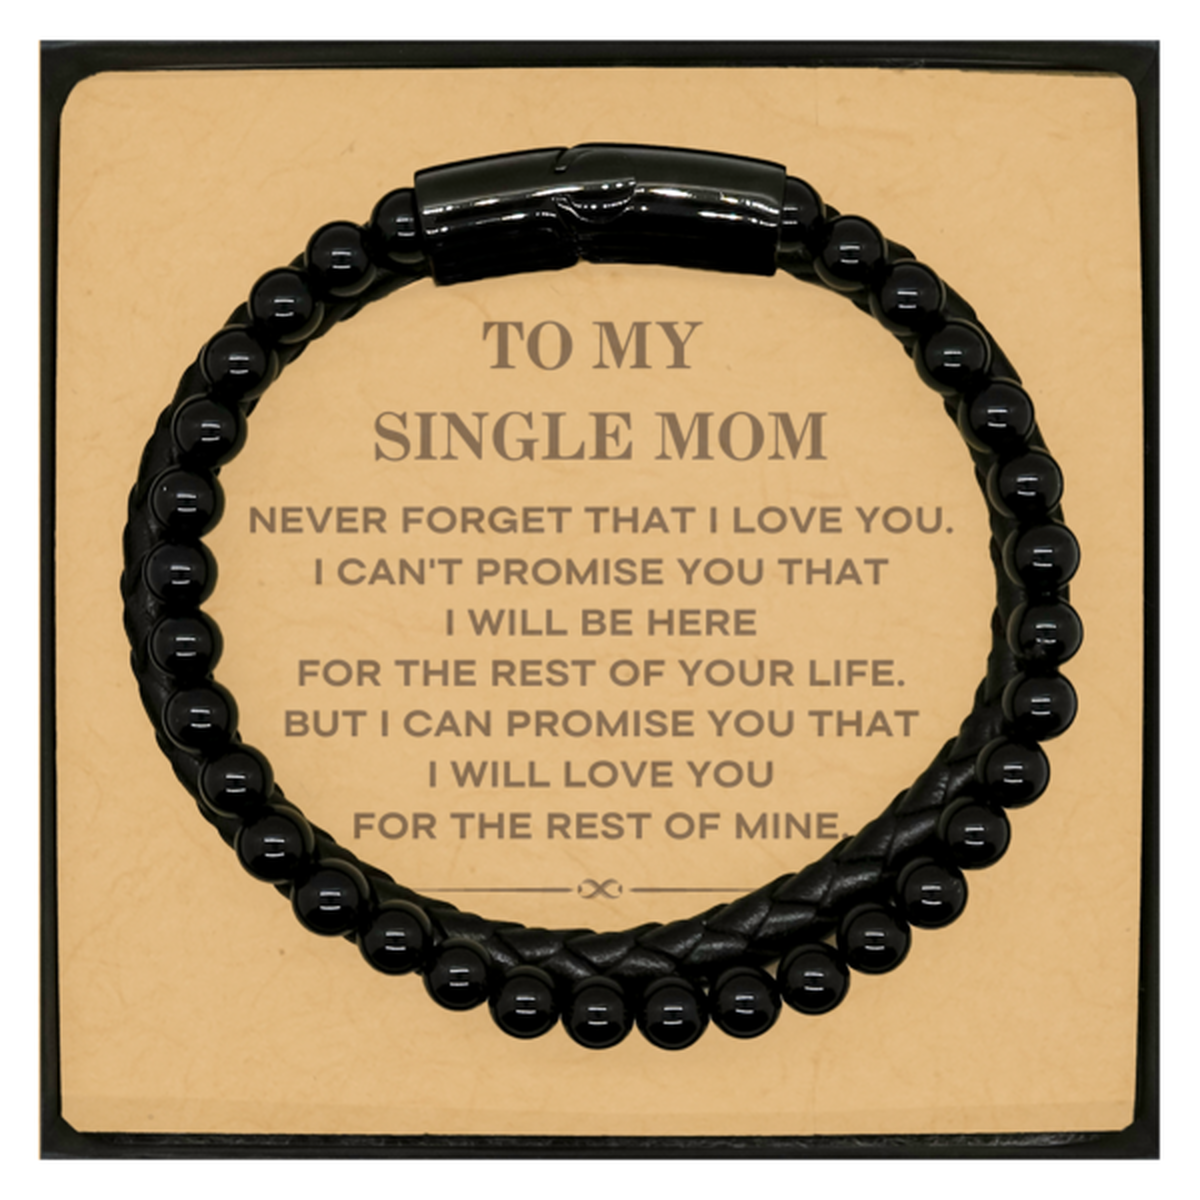 To My Single Mom Gifts, I will love you for the rest of mine, Love Single Mom Bracelet, Birthday Christmas Unique Stone Leather Bracelets For Single Mom